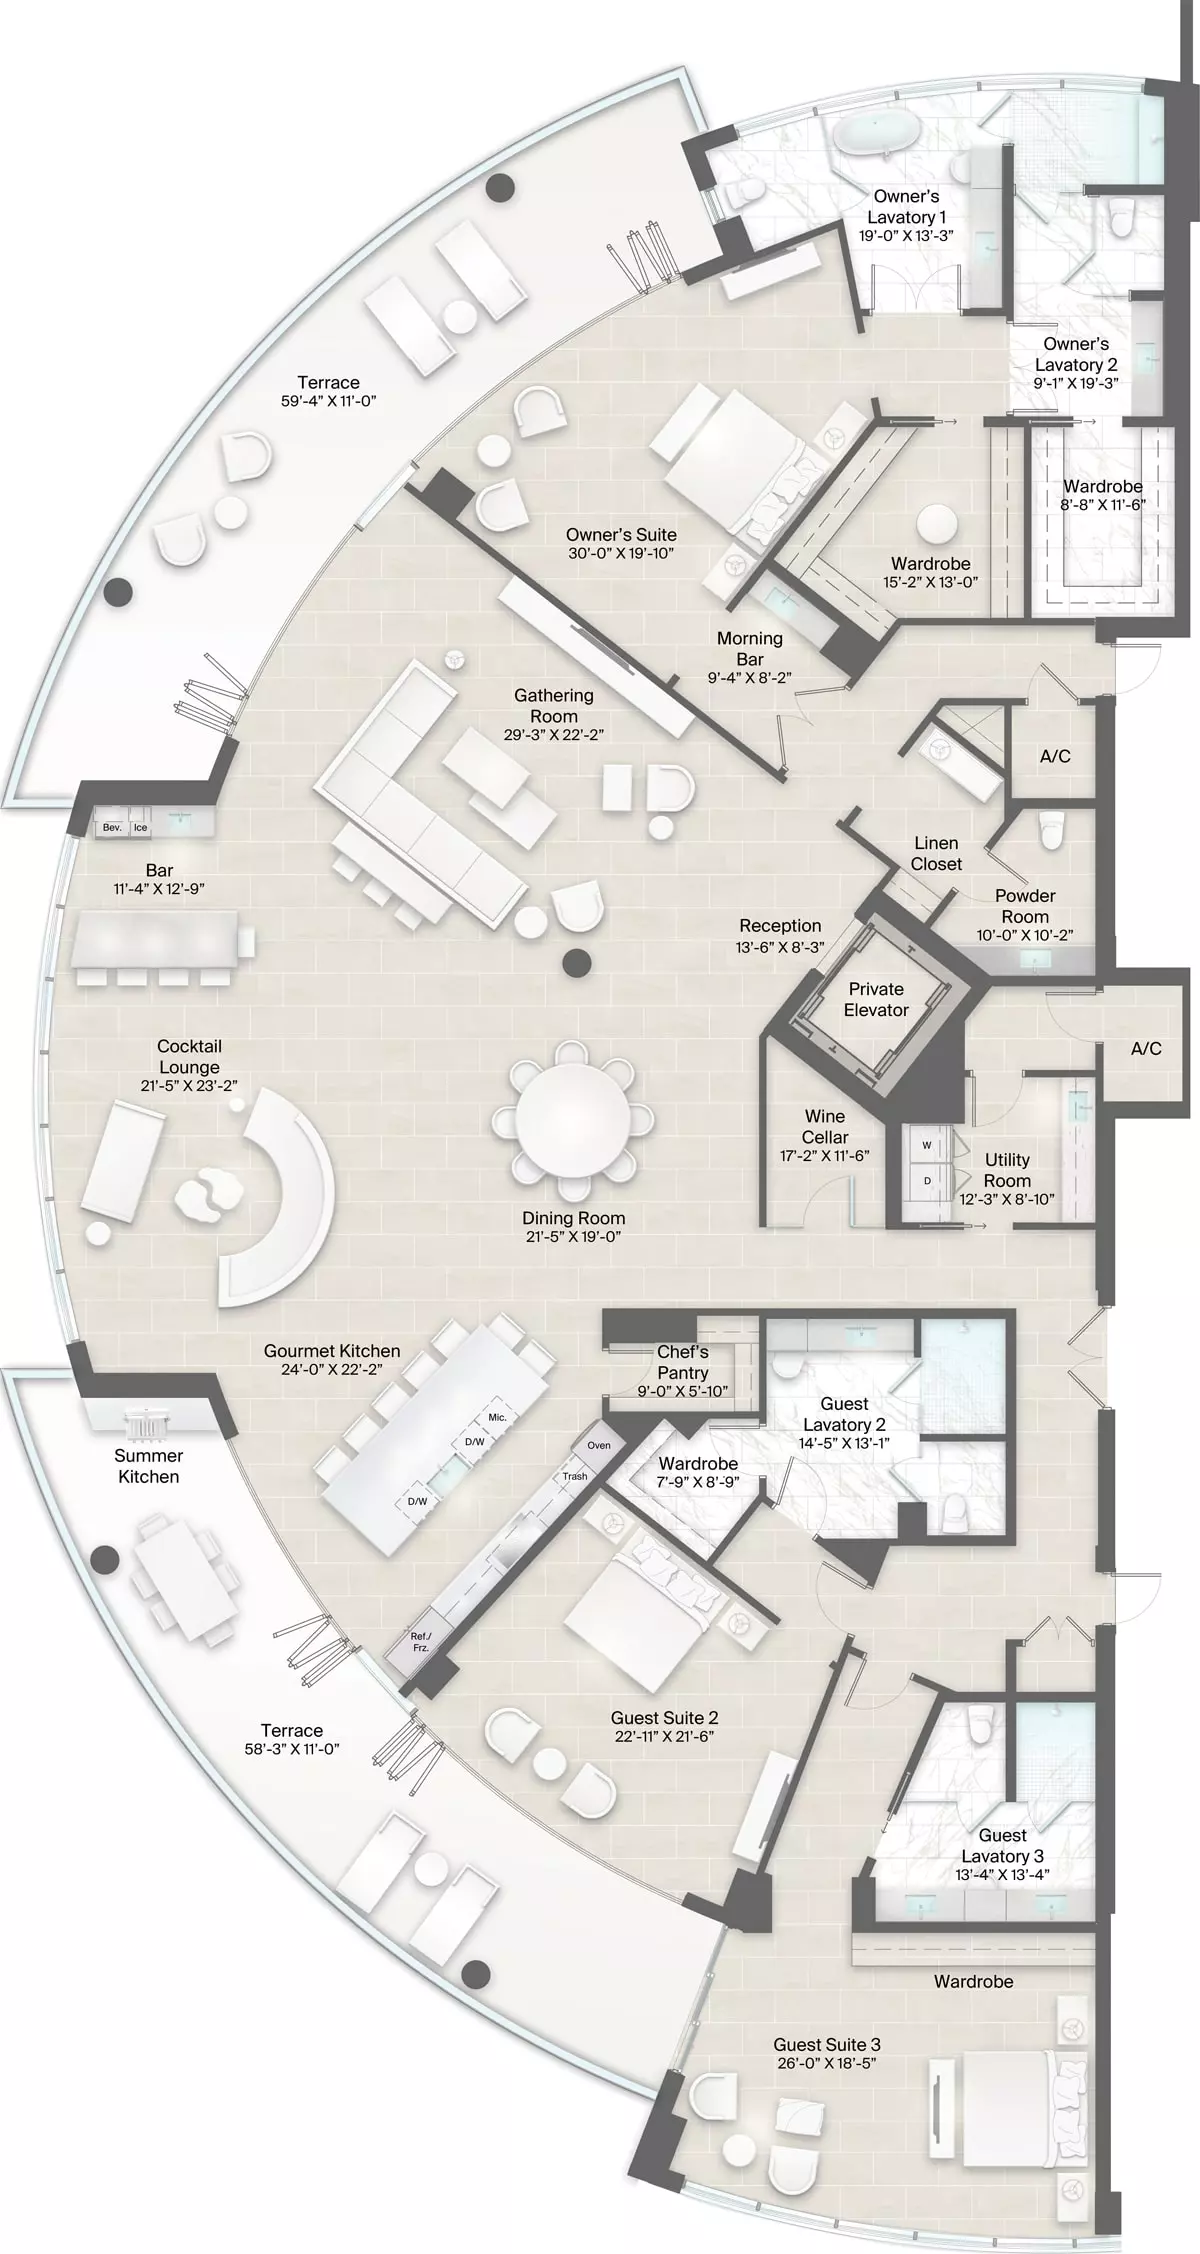 Armand Building, Plan 1 Floorplan includes 3 bedrooms, 4.5 baths and 2 expansive terraces looking out to the Gulf of Mexico. 